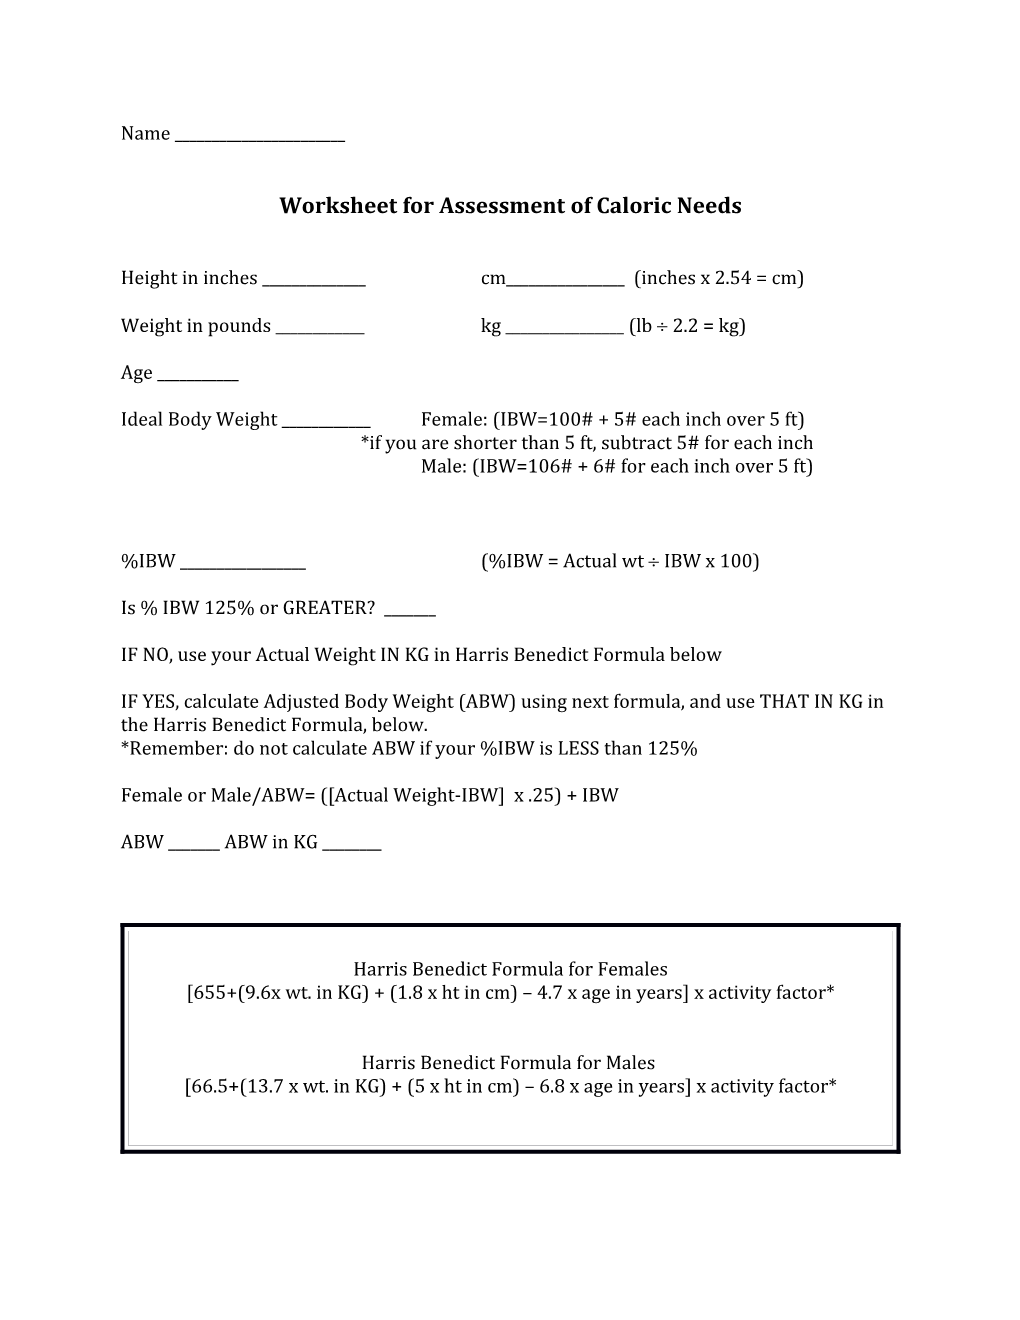 Worksheet for Assessment of Caloric Needs